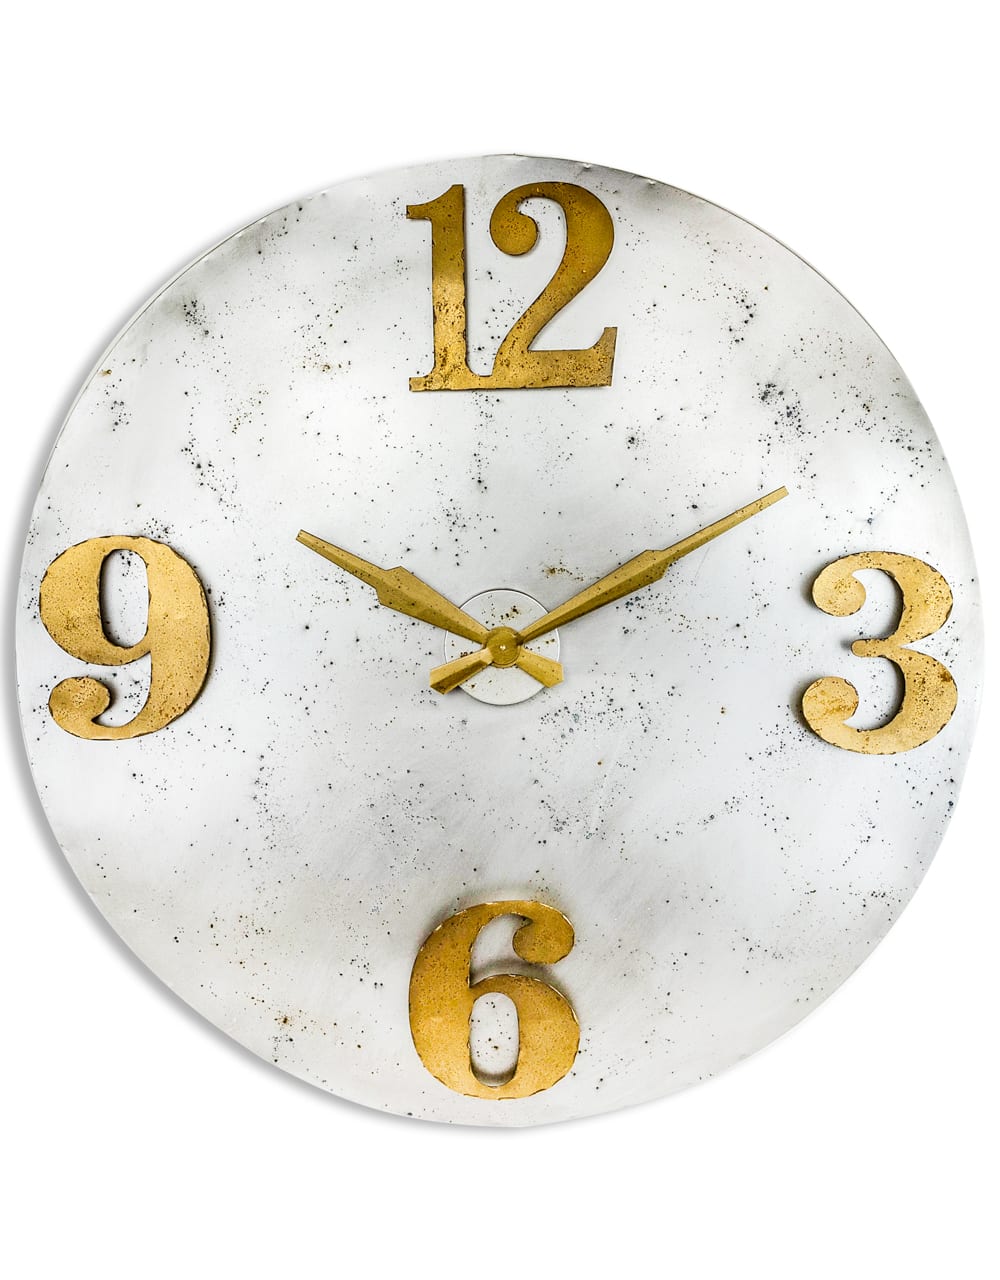 XL Industrial Steel Clock with Gold Numerals